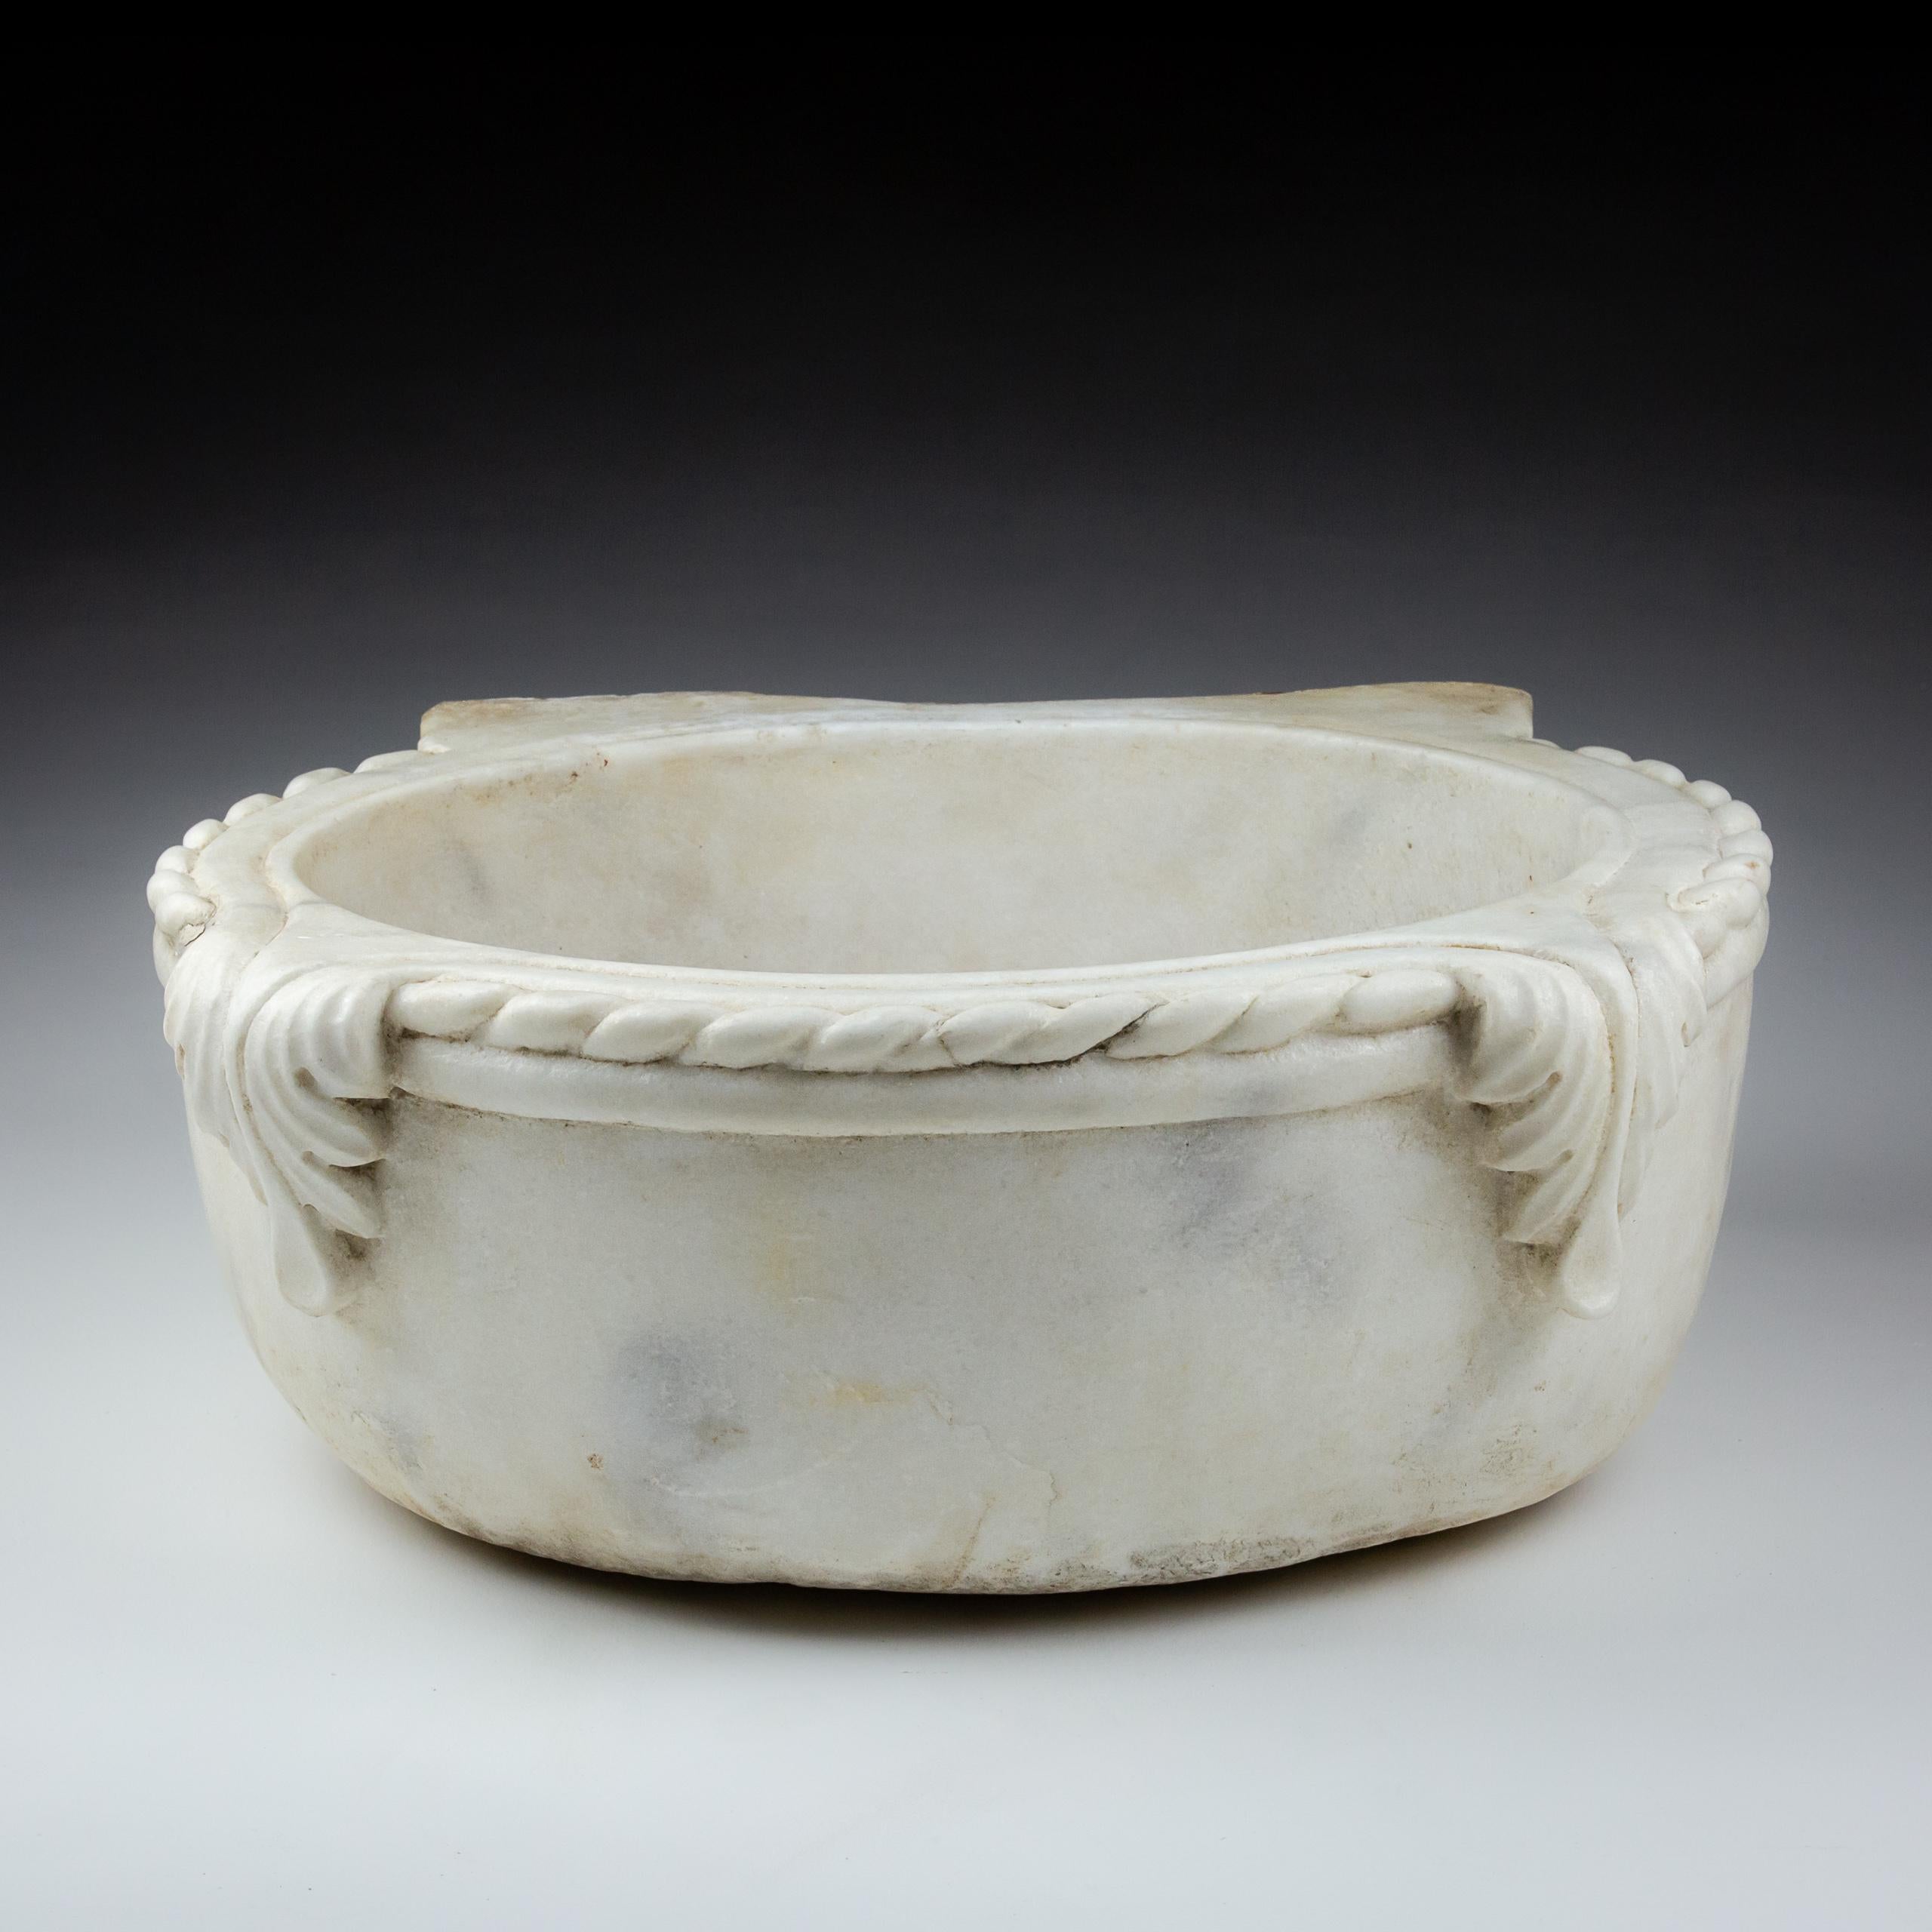 Early 19th Century Marble Font or Benitier, acanthus leaf decoration to each side, with a rope twist decoration along the rim. Excellent condition with a mellow soft patina. for the right project it would be a remarkable wash hand basin. Italy Circa